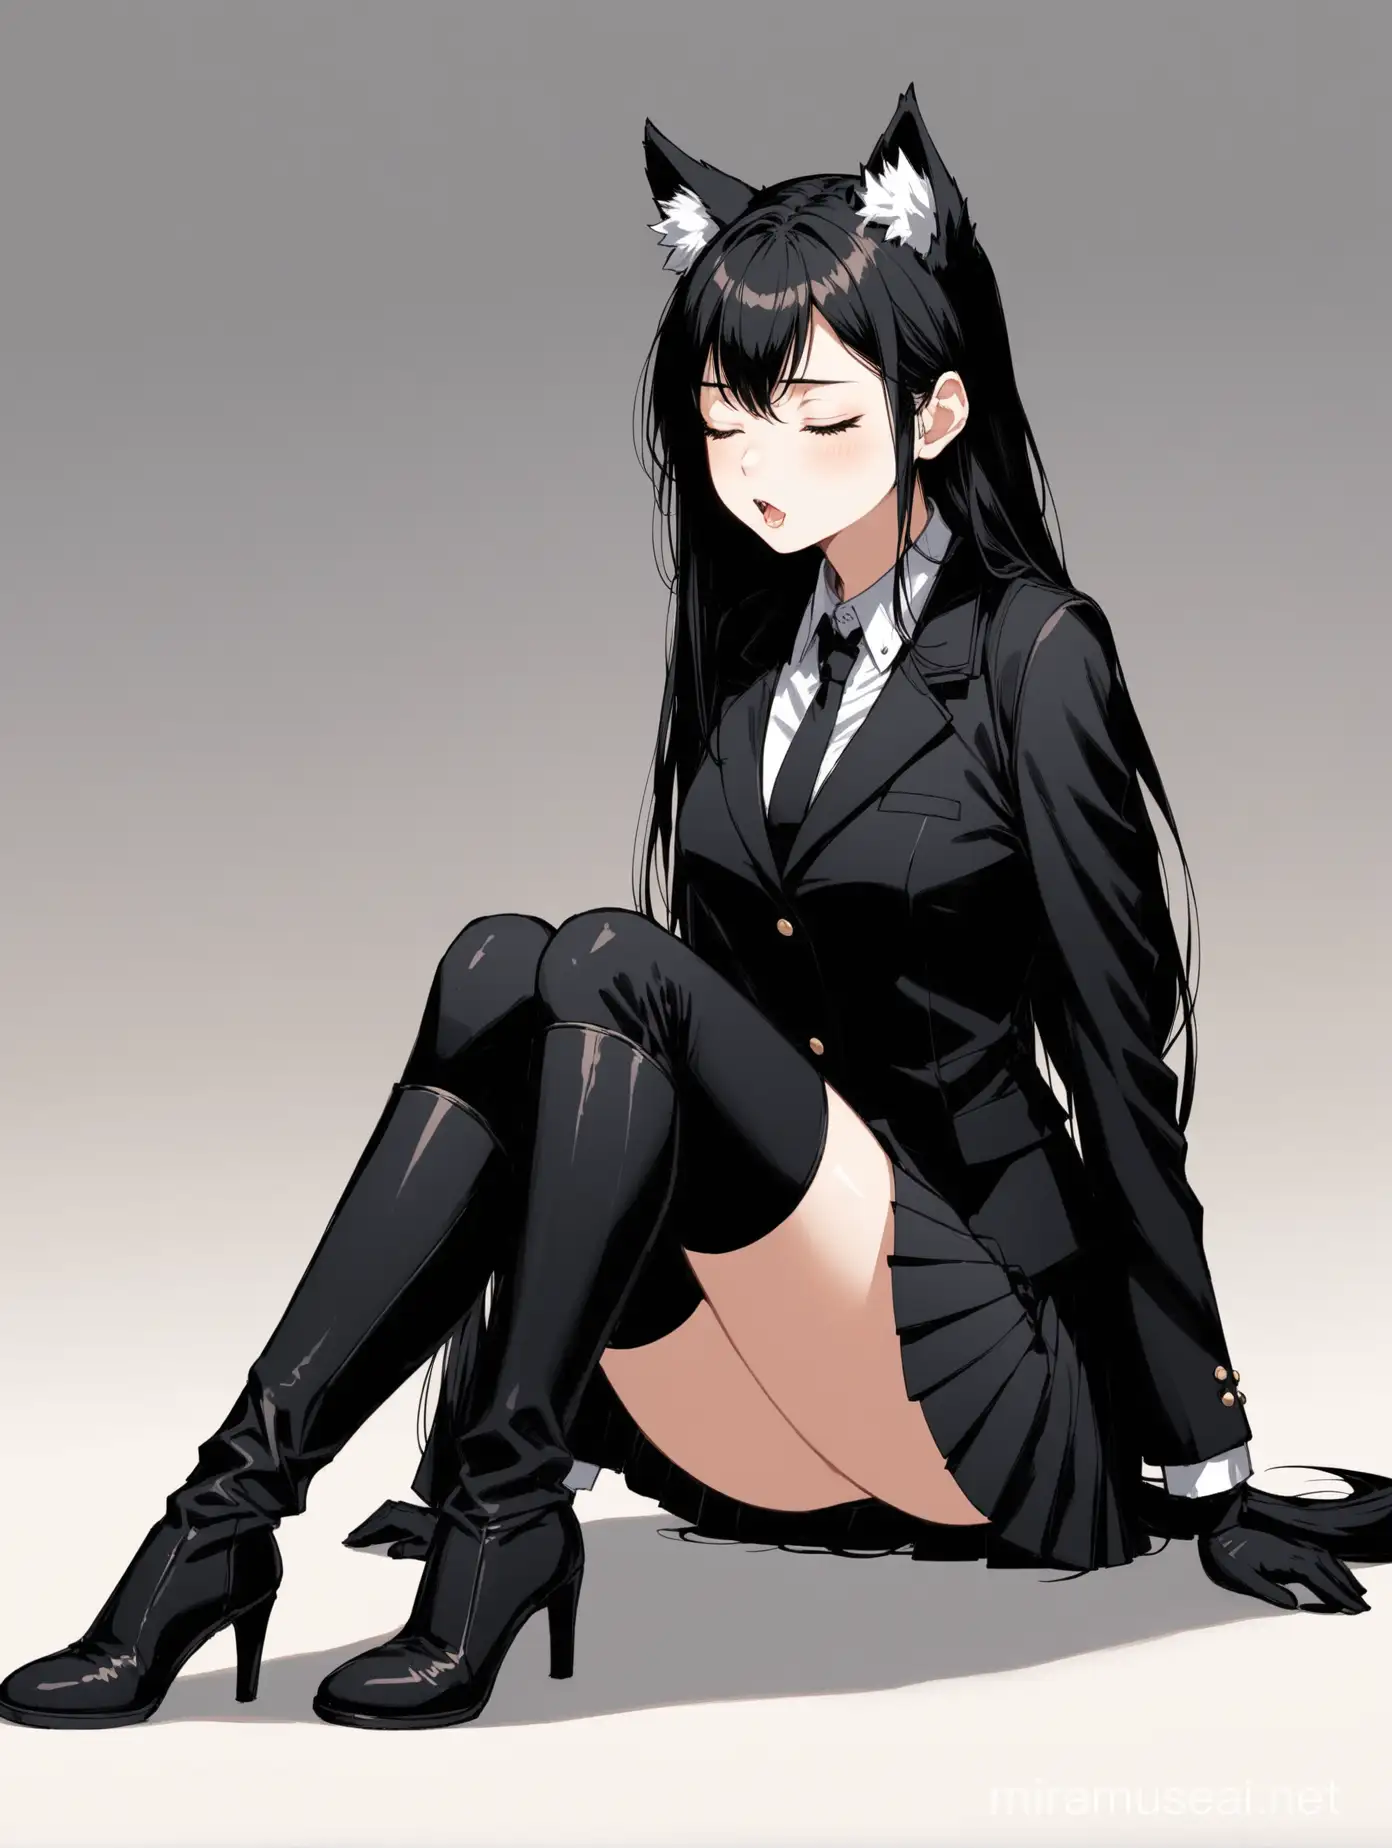 full body view, side profile, tall girl, wolf girl, wolf ears, white ear tufts, eyes closed, long hair, black hair, short black suit coat, short black pleated skirt, black gloves, long sleeves, black tall thigh boots, neutral expression, kneeling down on floor, legs together, head tilted up, mouth open